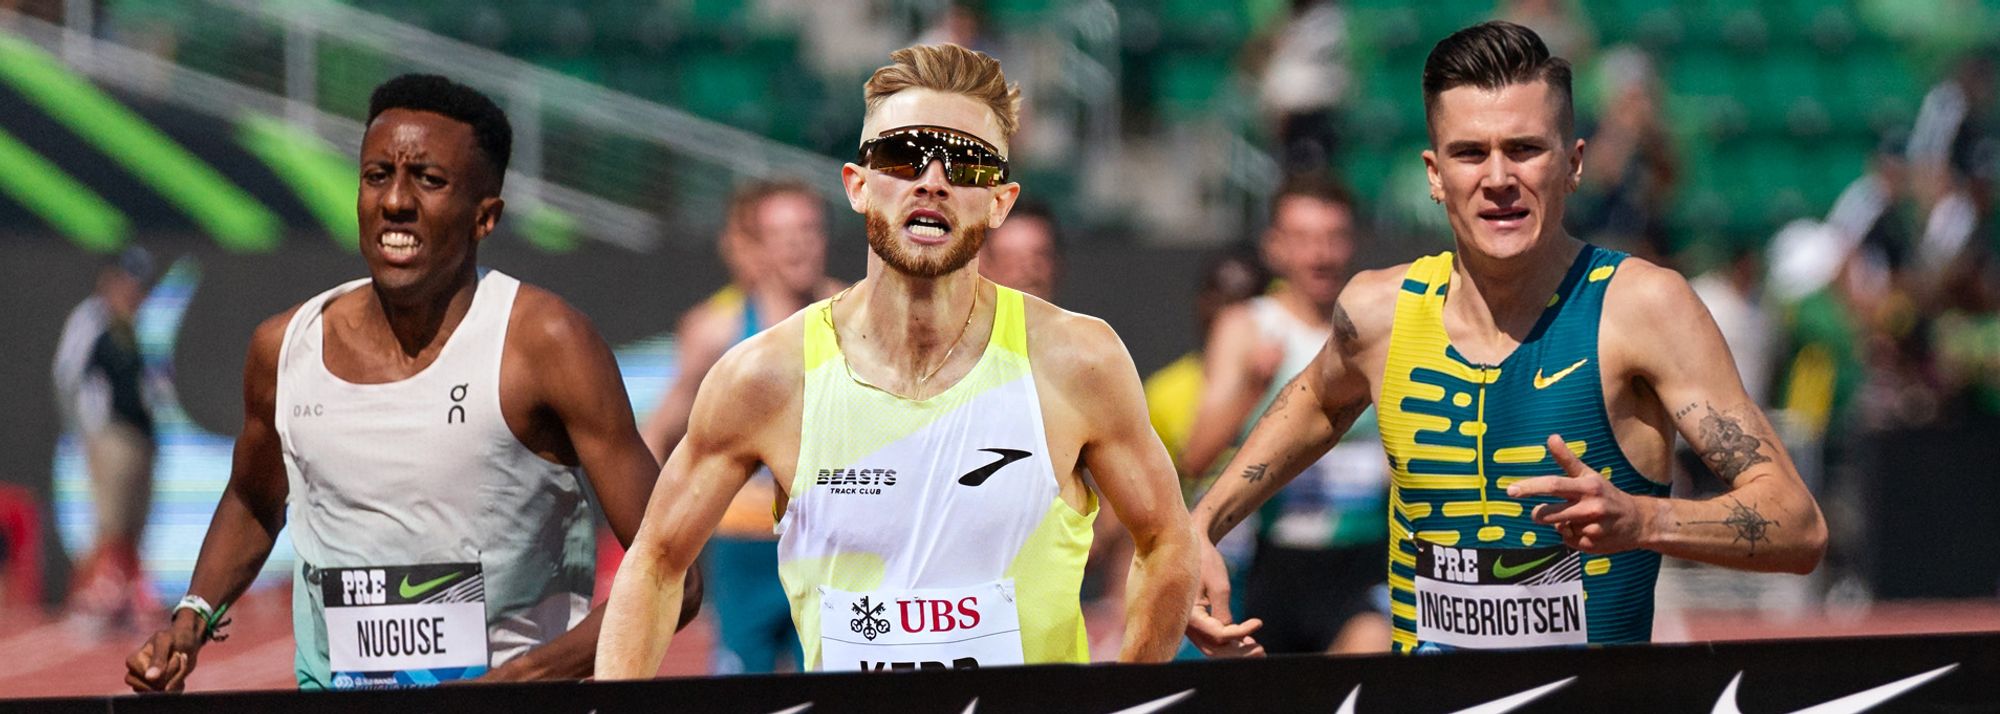 The Bowerman Mile is one of the fastest - and most anticipated - races at the Prefontaine Classic